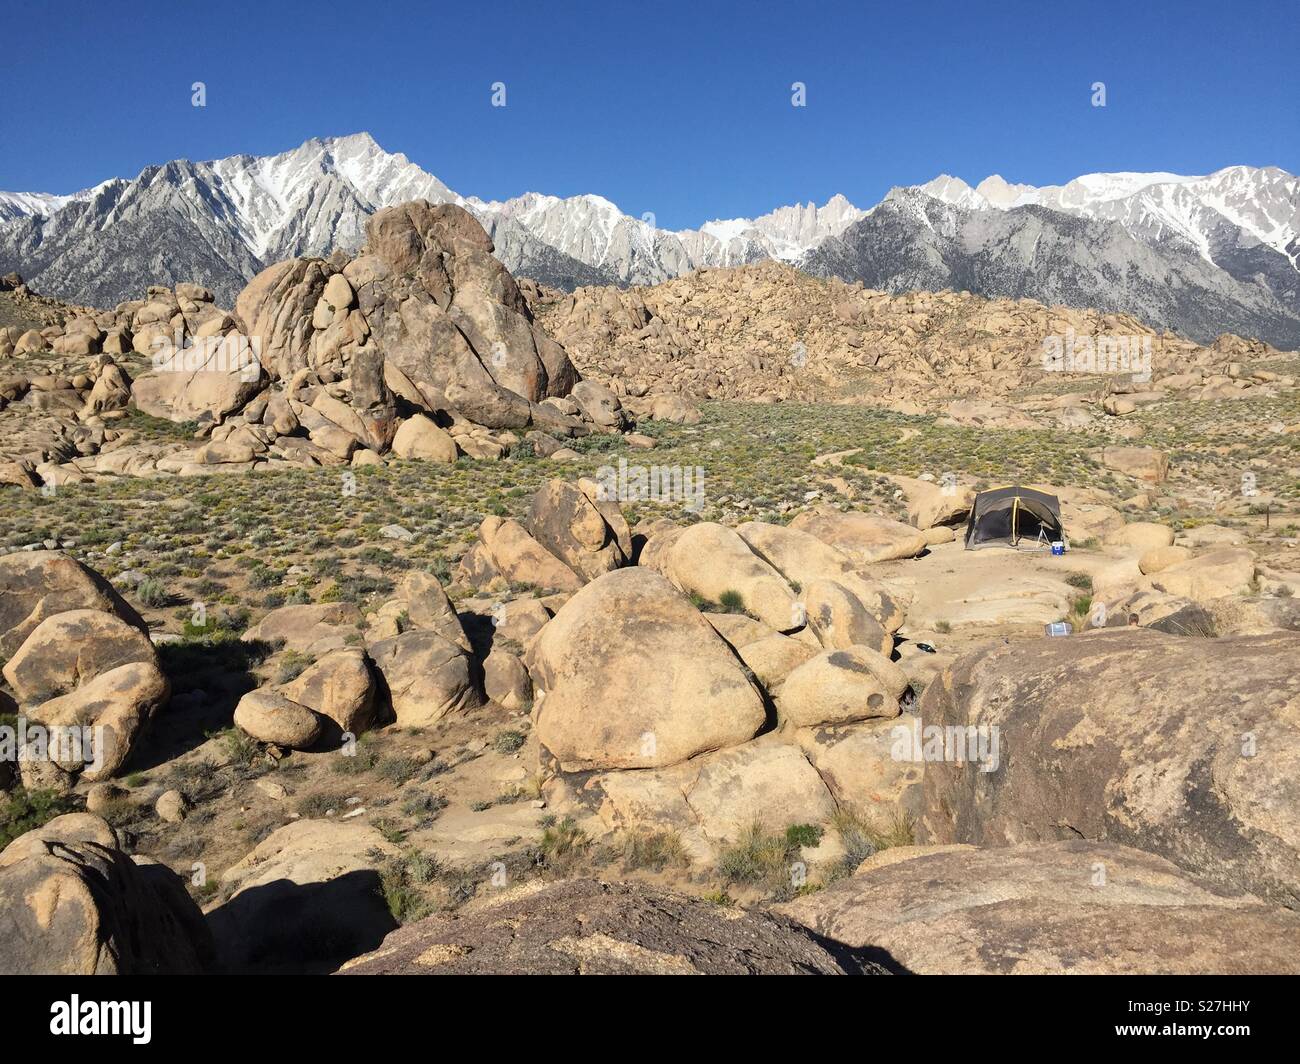 A campsite in rocky terrain with mountains in the background. Stock Photo